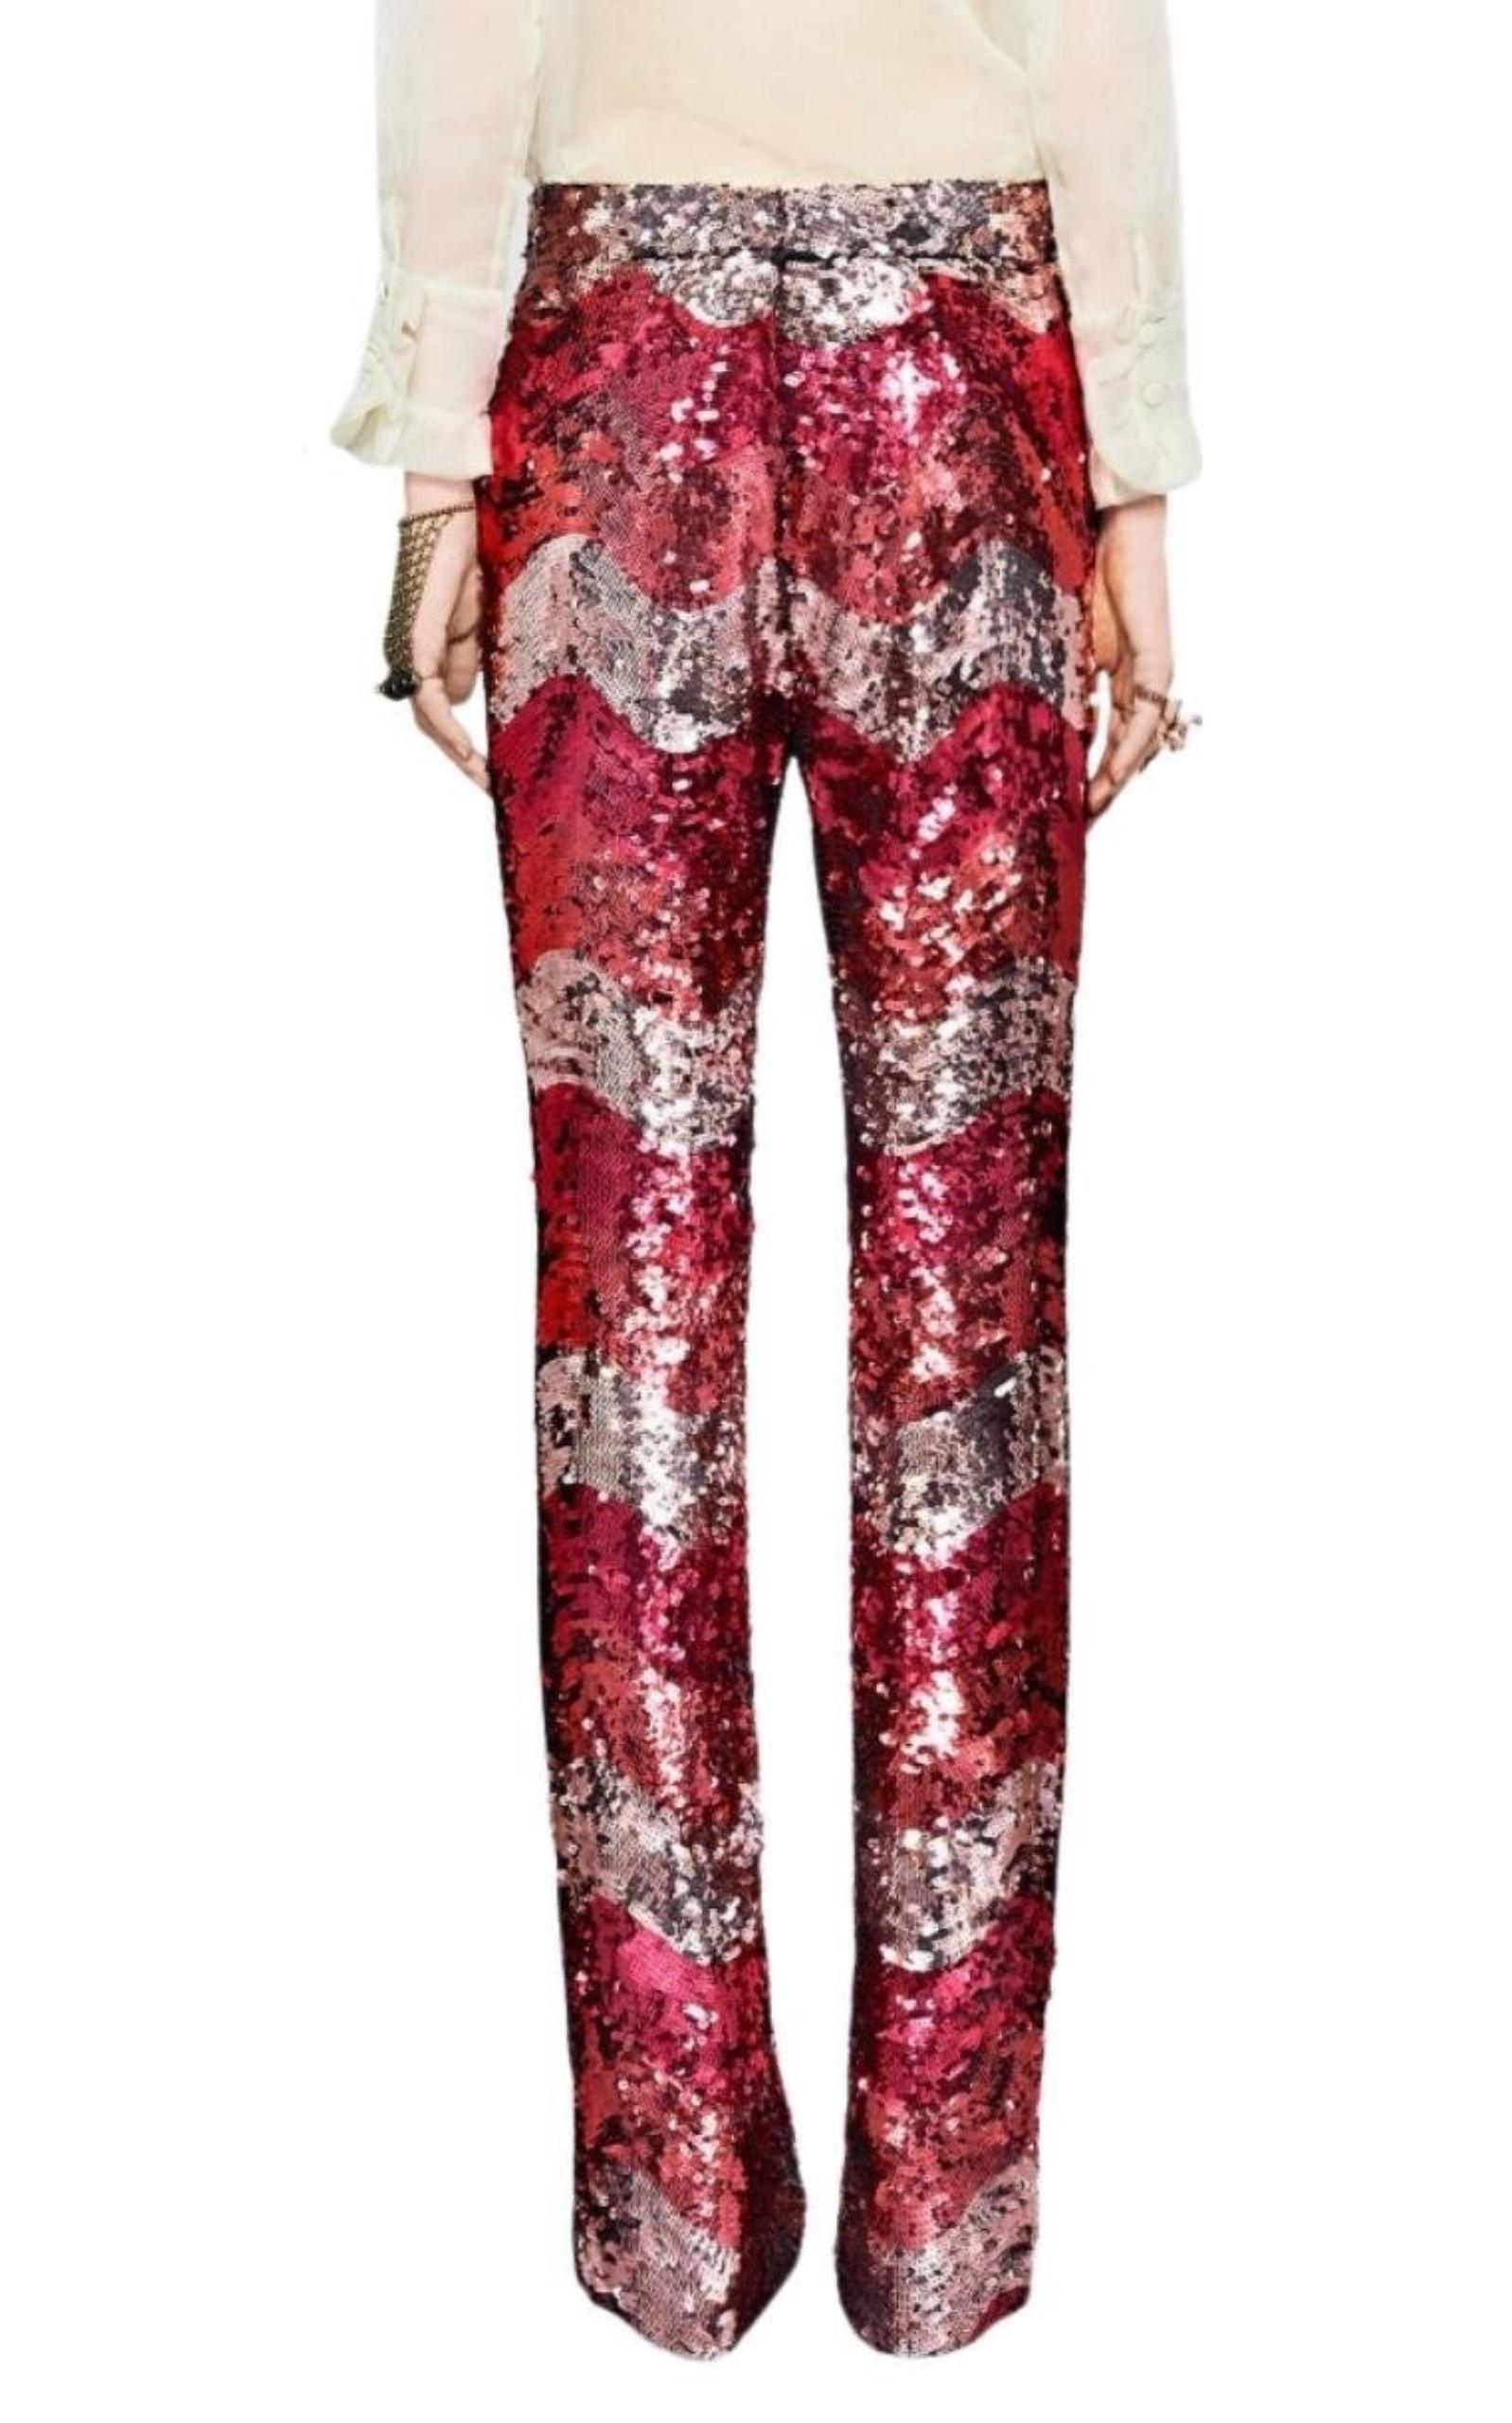  GucciSequin Snake Straight Leg Pants in Red - Runway Catalog